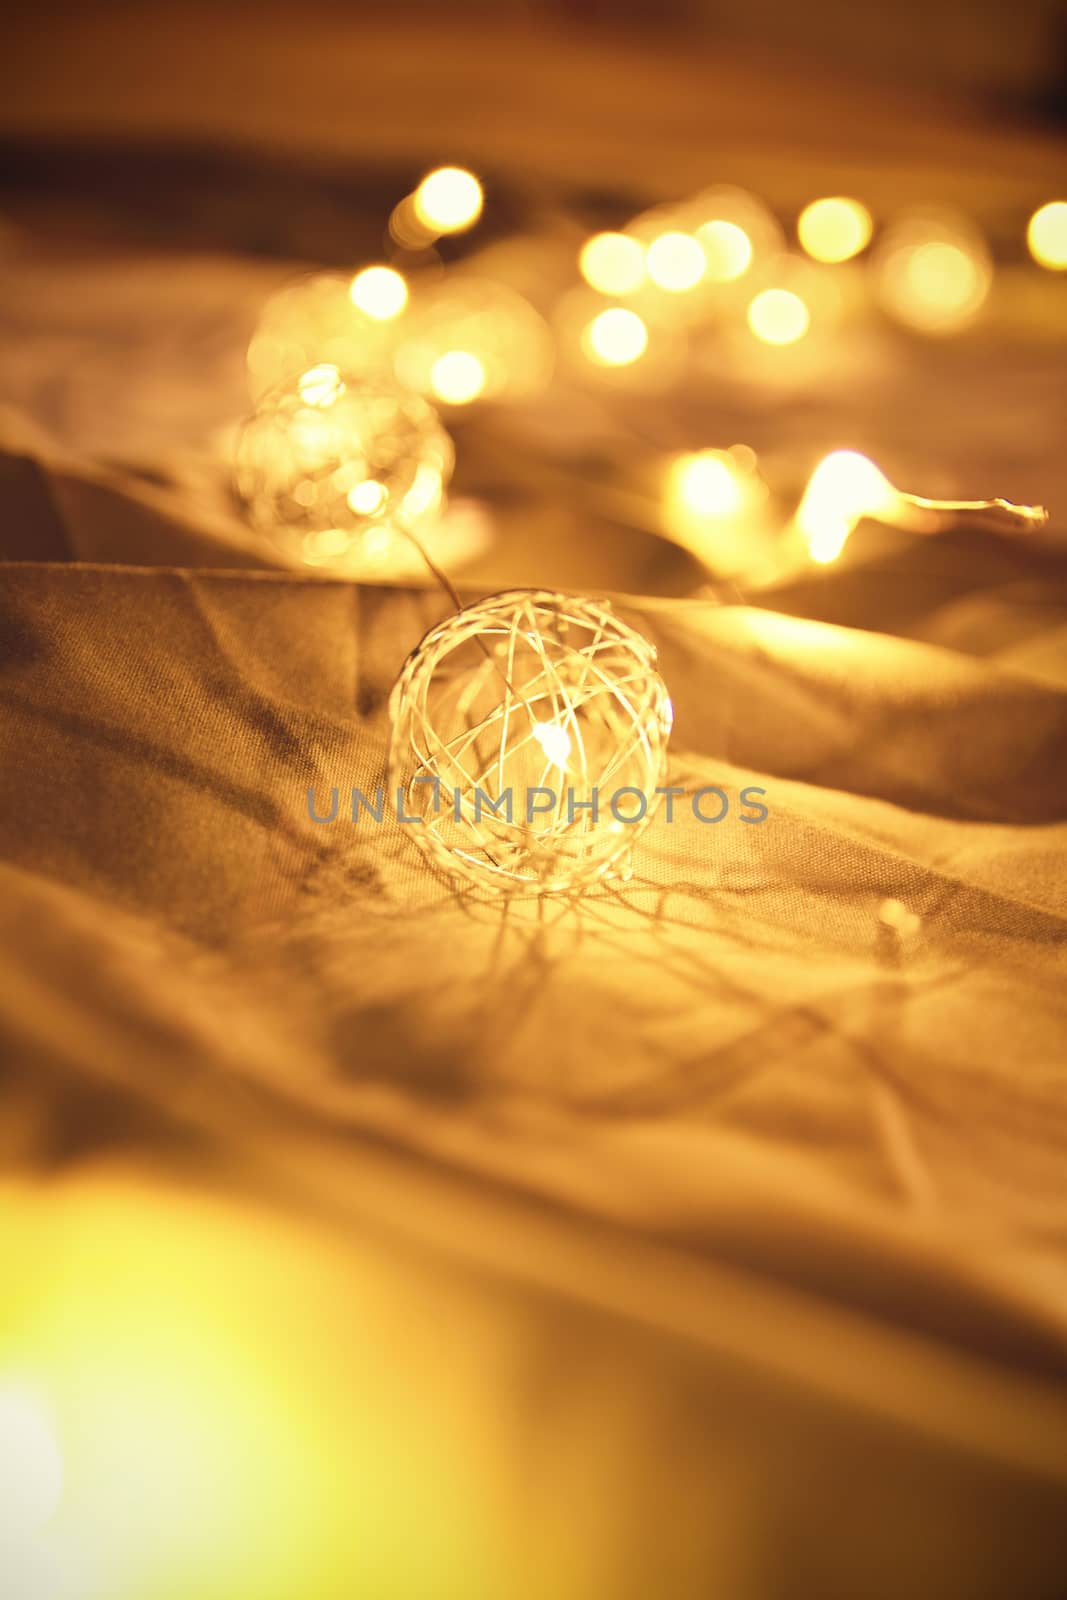 Blurred golden Christmas lights on rumpled bed sheets by Mendelex